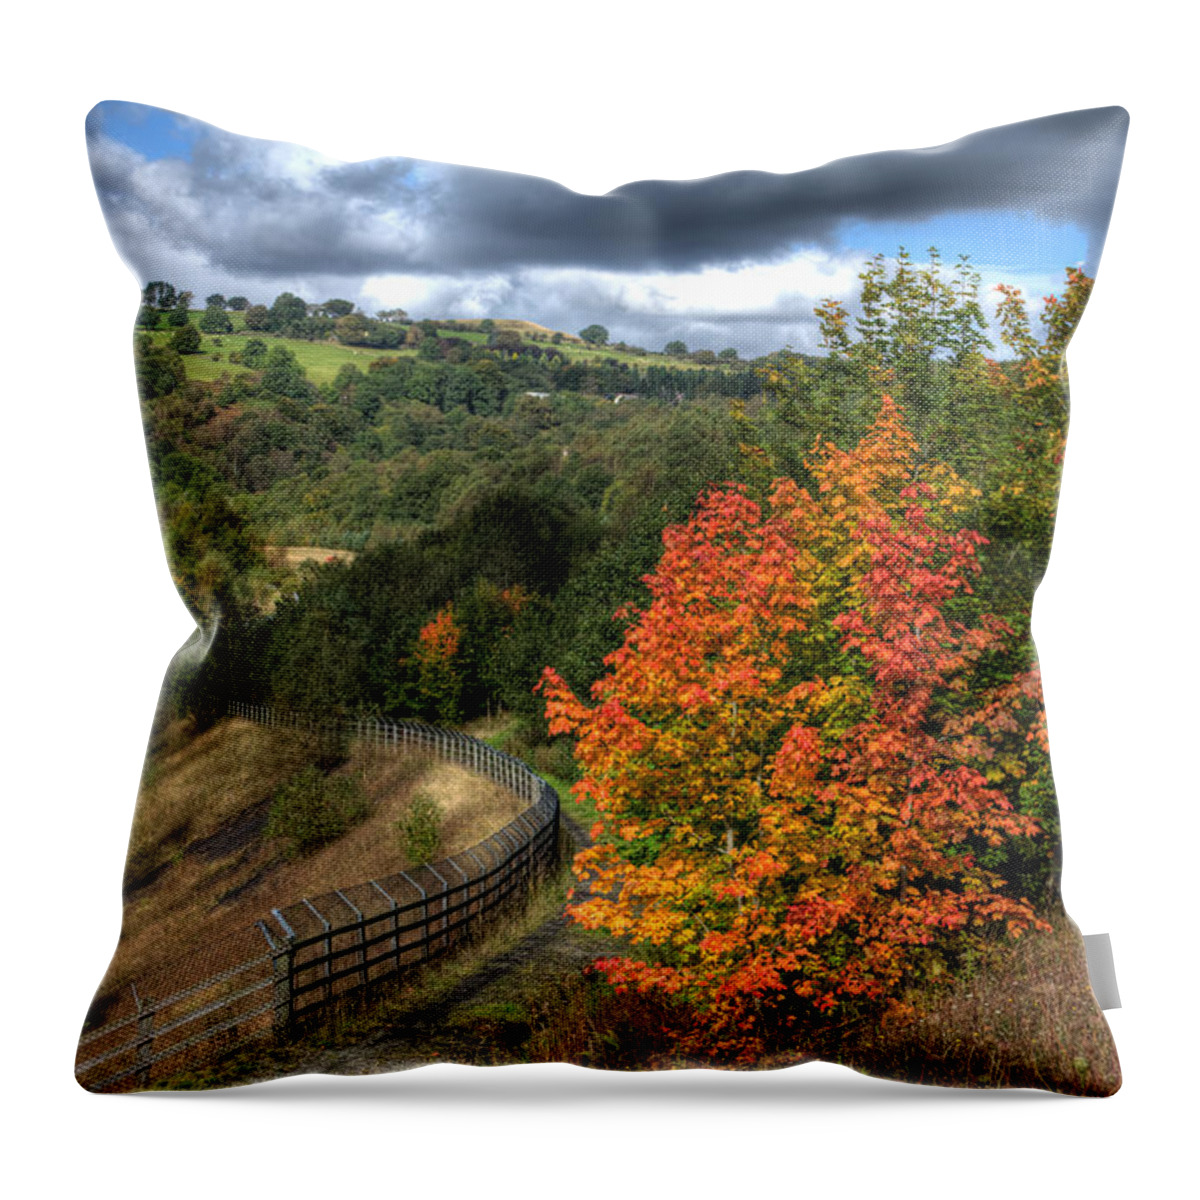 Bargoed Woodland Park Throw Pillow featuring the photograph Bargoed Woodland Park by Steve Purnell